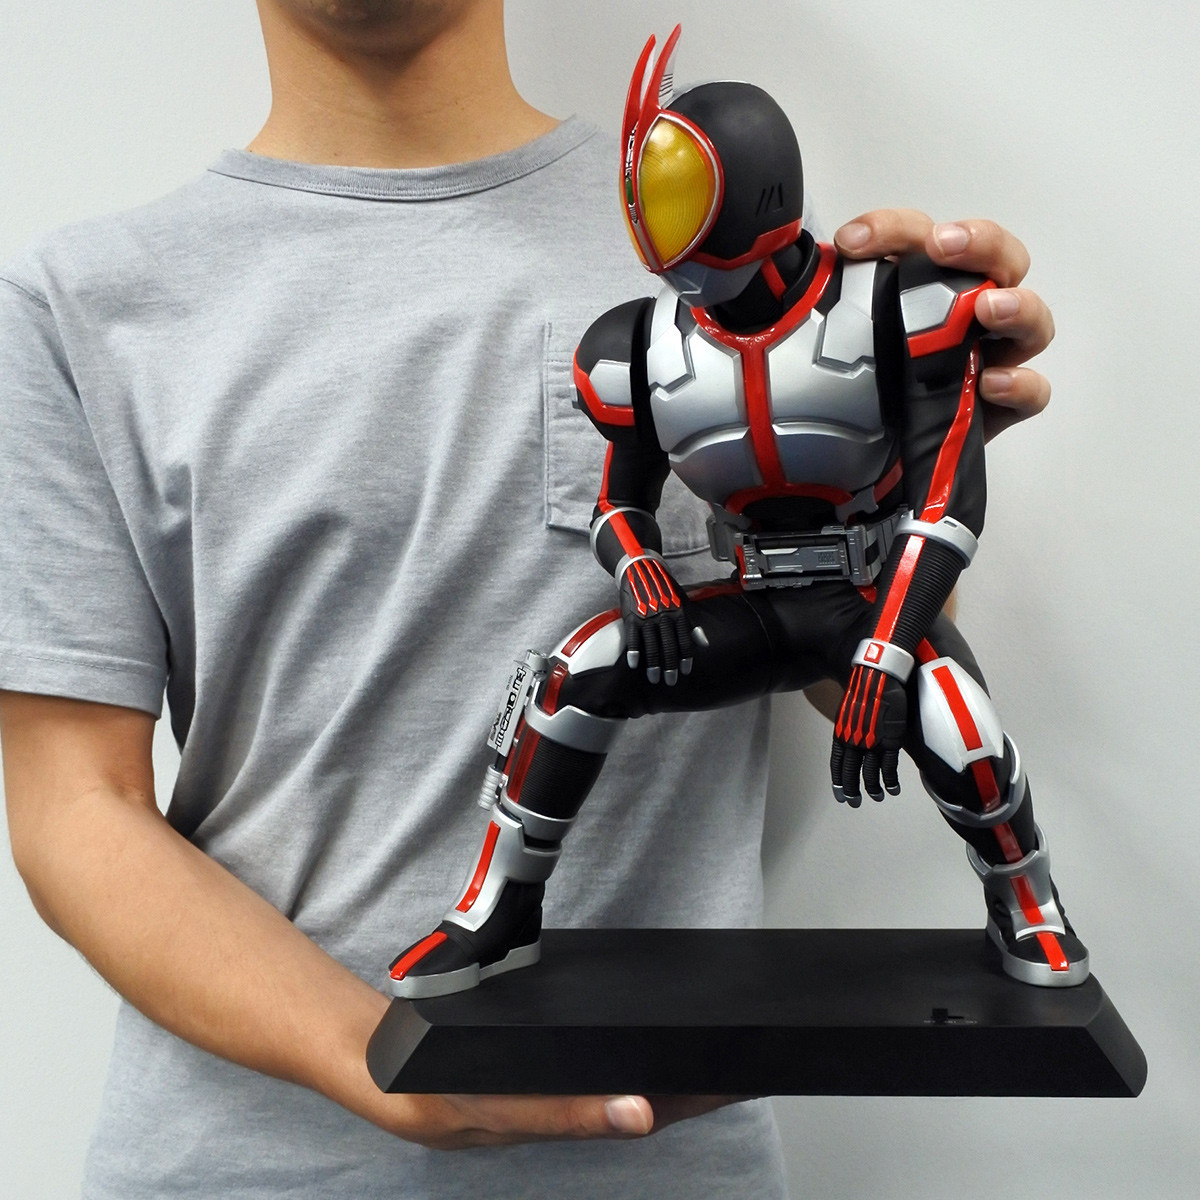 Megahouse Ultimate Article 假面騎士555 LED發光雕像 0619